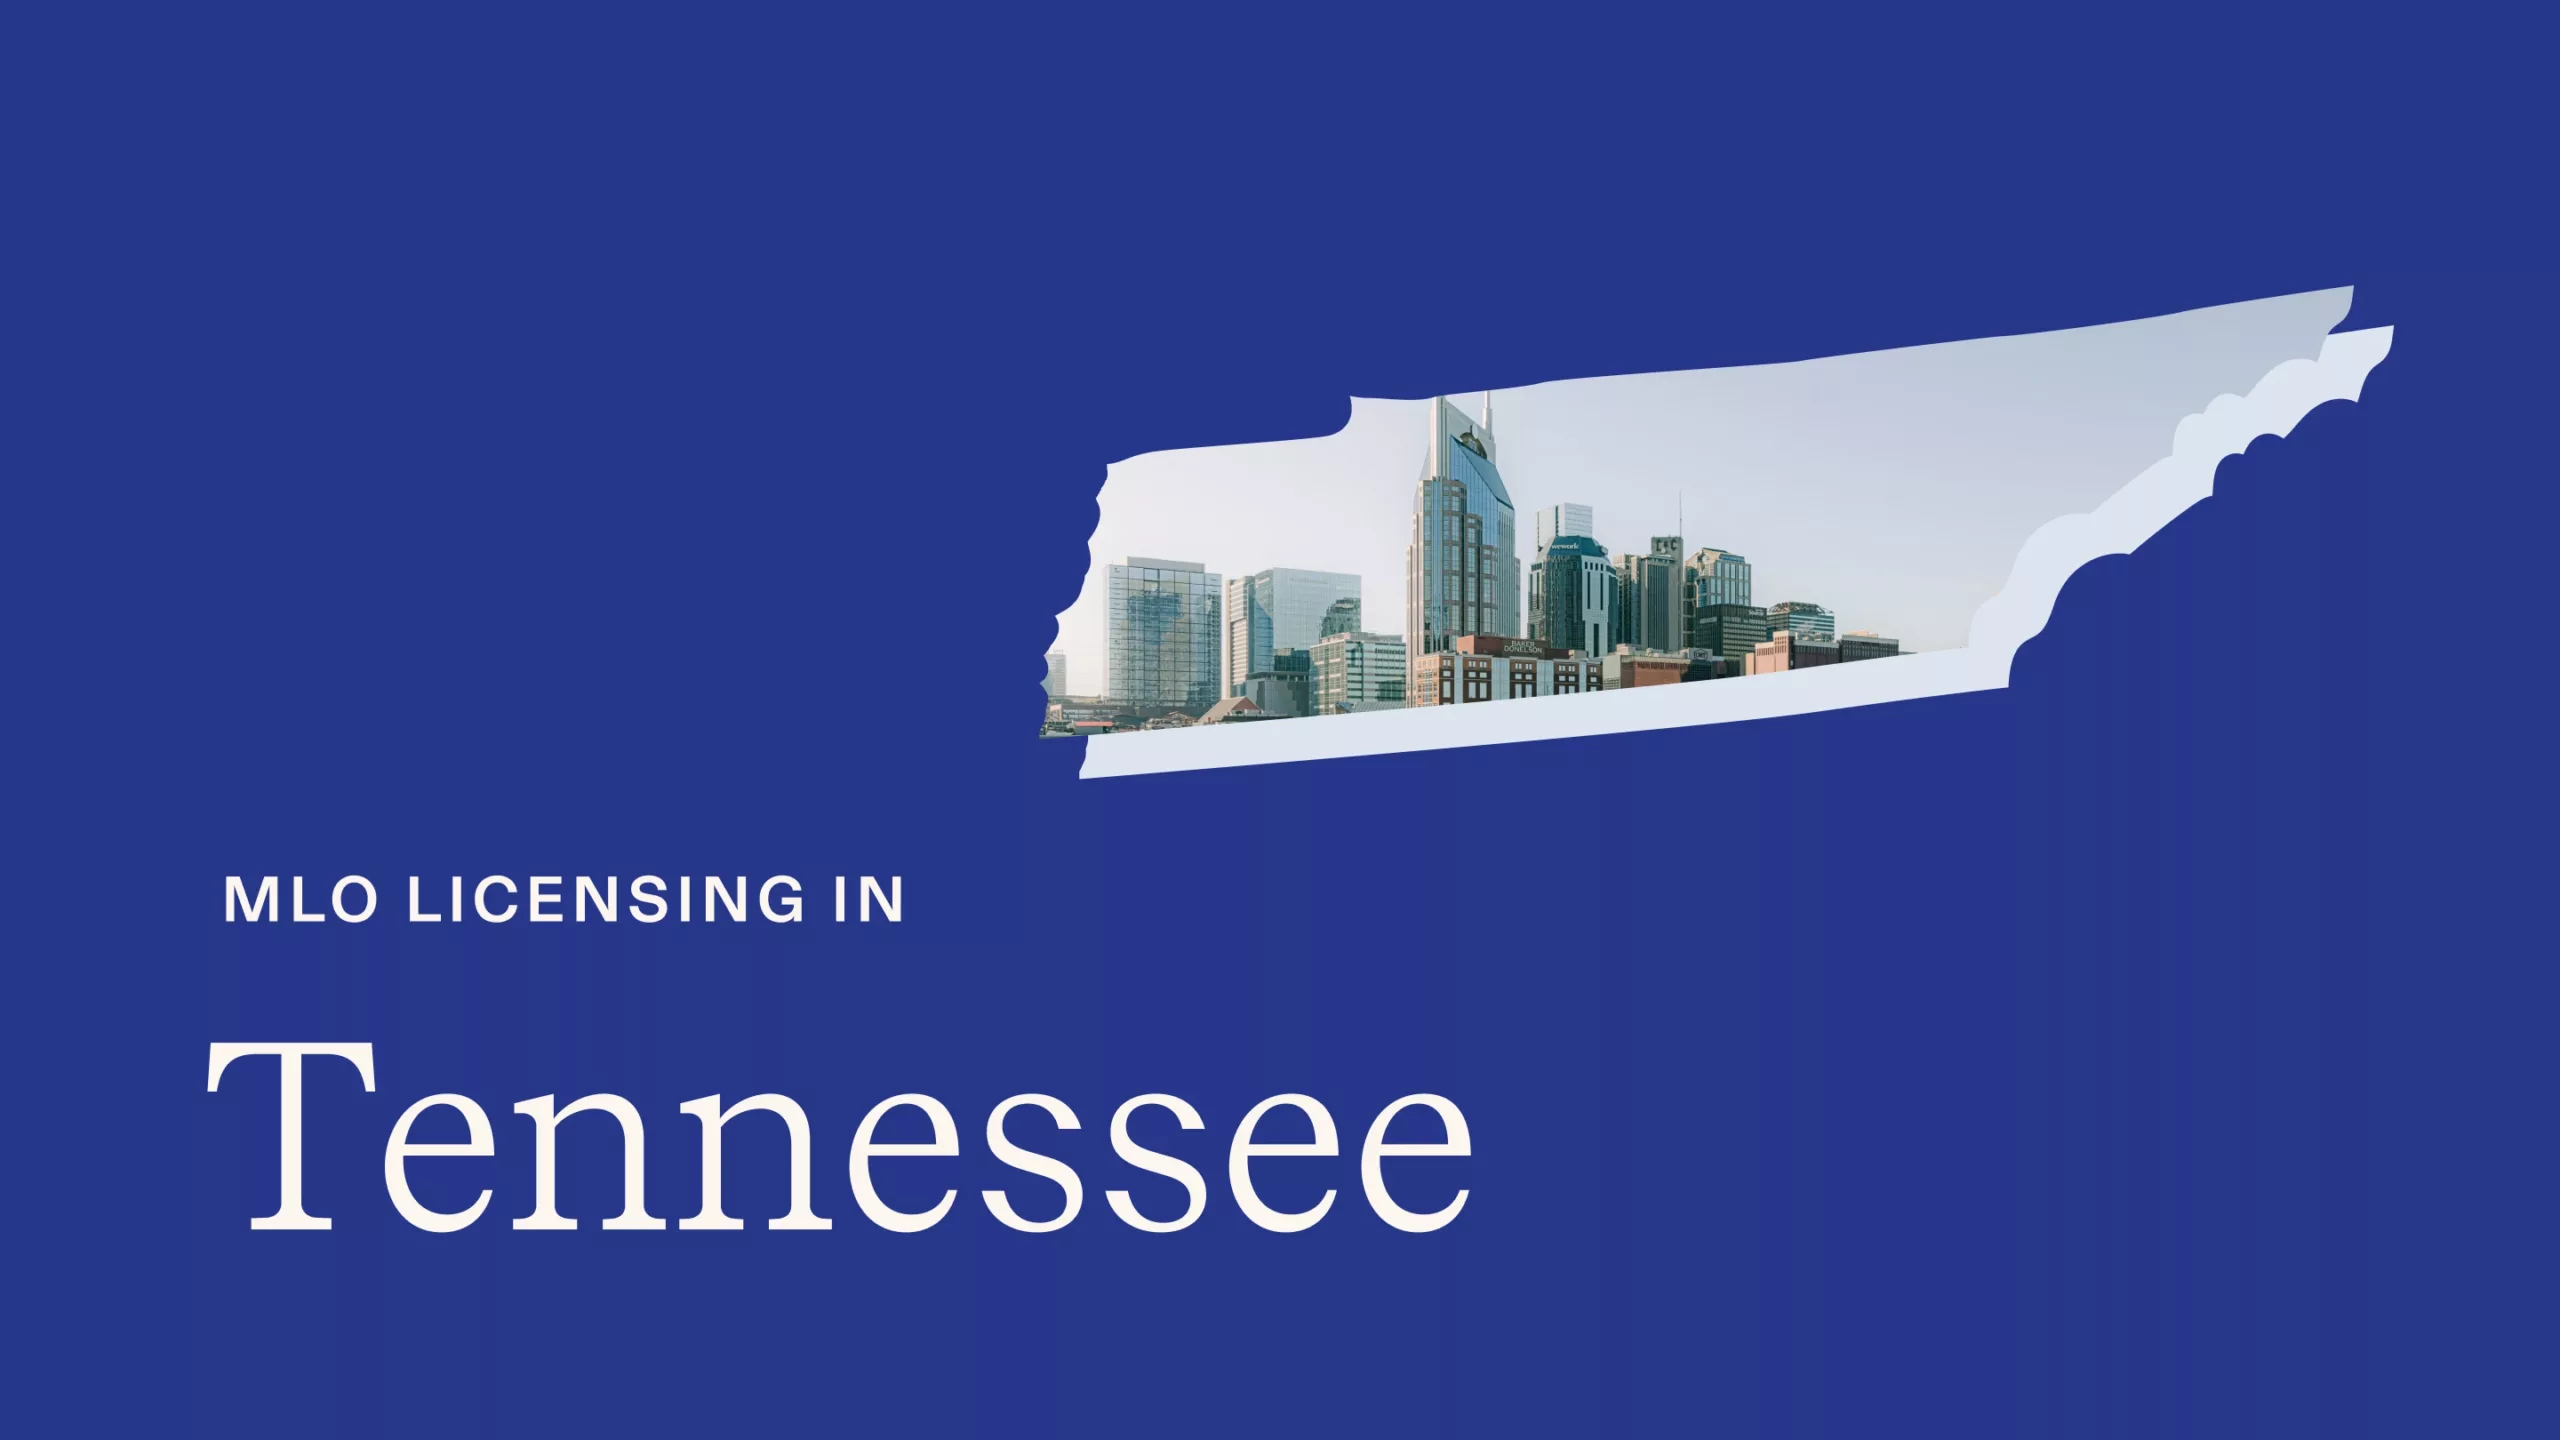 illustration of the state of Tennessee